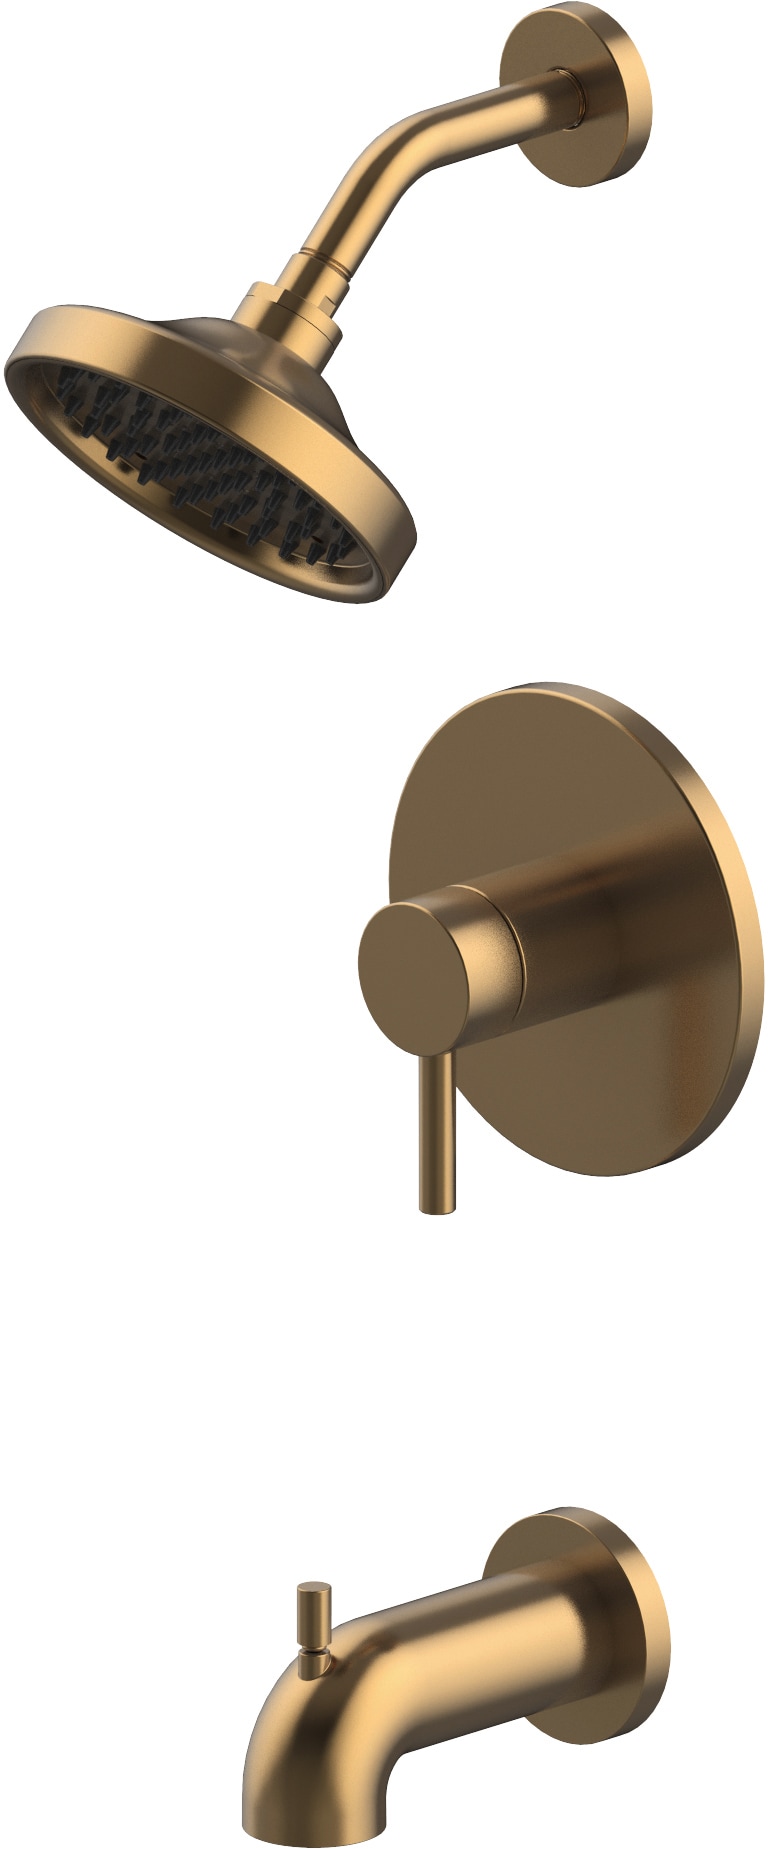 allen + roth Harlow Brushed Bronze 1-handle Single Function Round Bathtub and Shower Faucet Valve Included